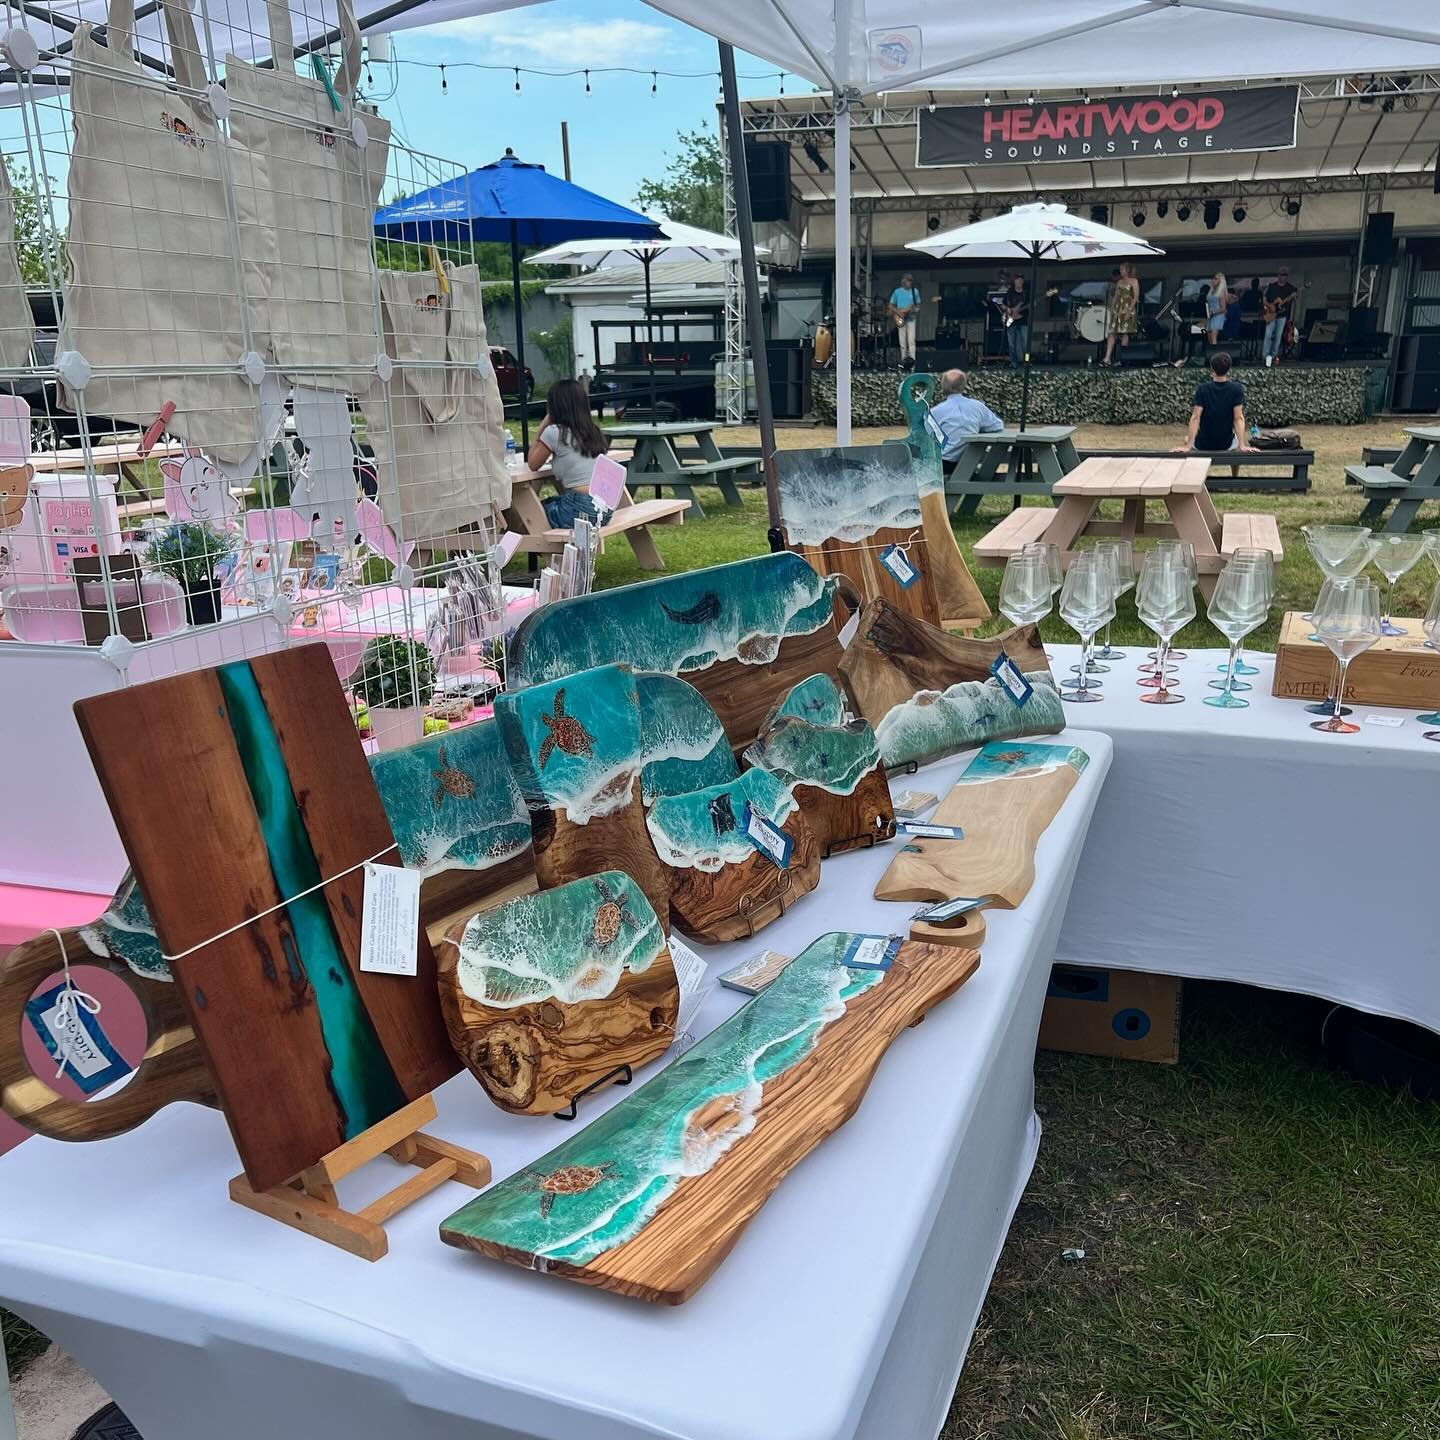 Looking forward to our last Expanded Market before the summer, this Thursday from 4-7pm! 

Shop for local produce and art, hear live music and eat some yummy food! 

#gainesvillefl #onlyingainesville #visitgainesville #352 #alchuacounty #downtowngnv 